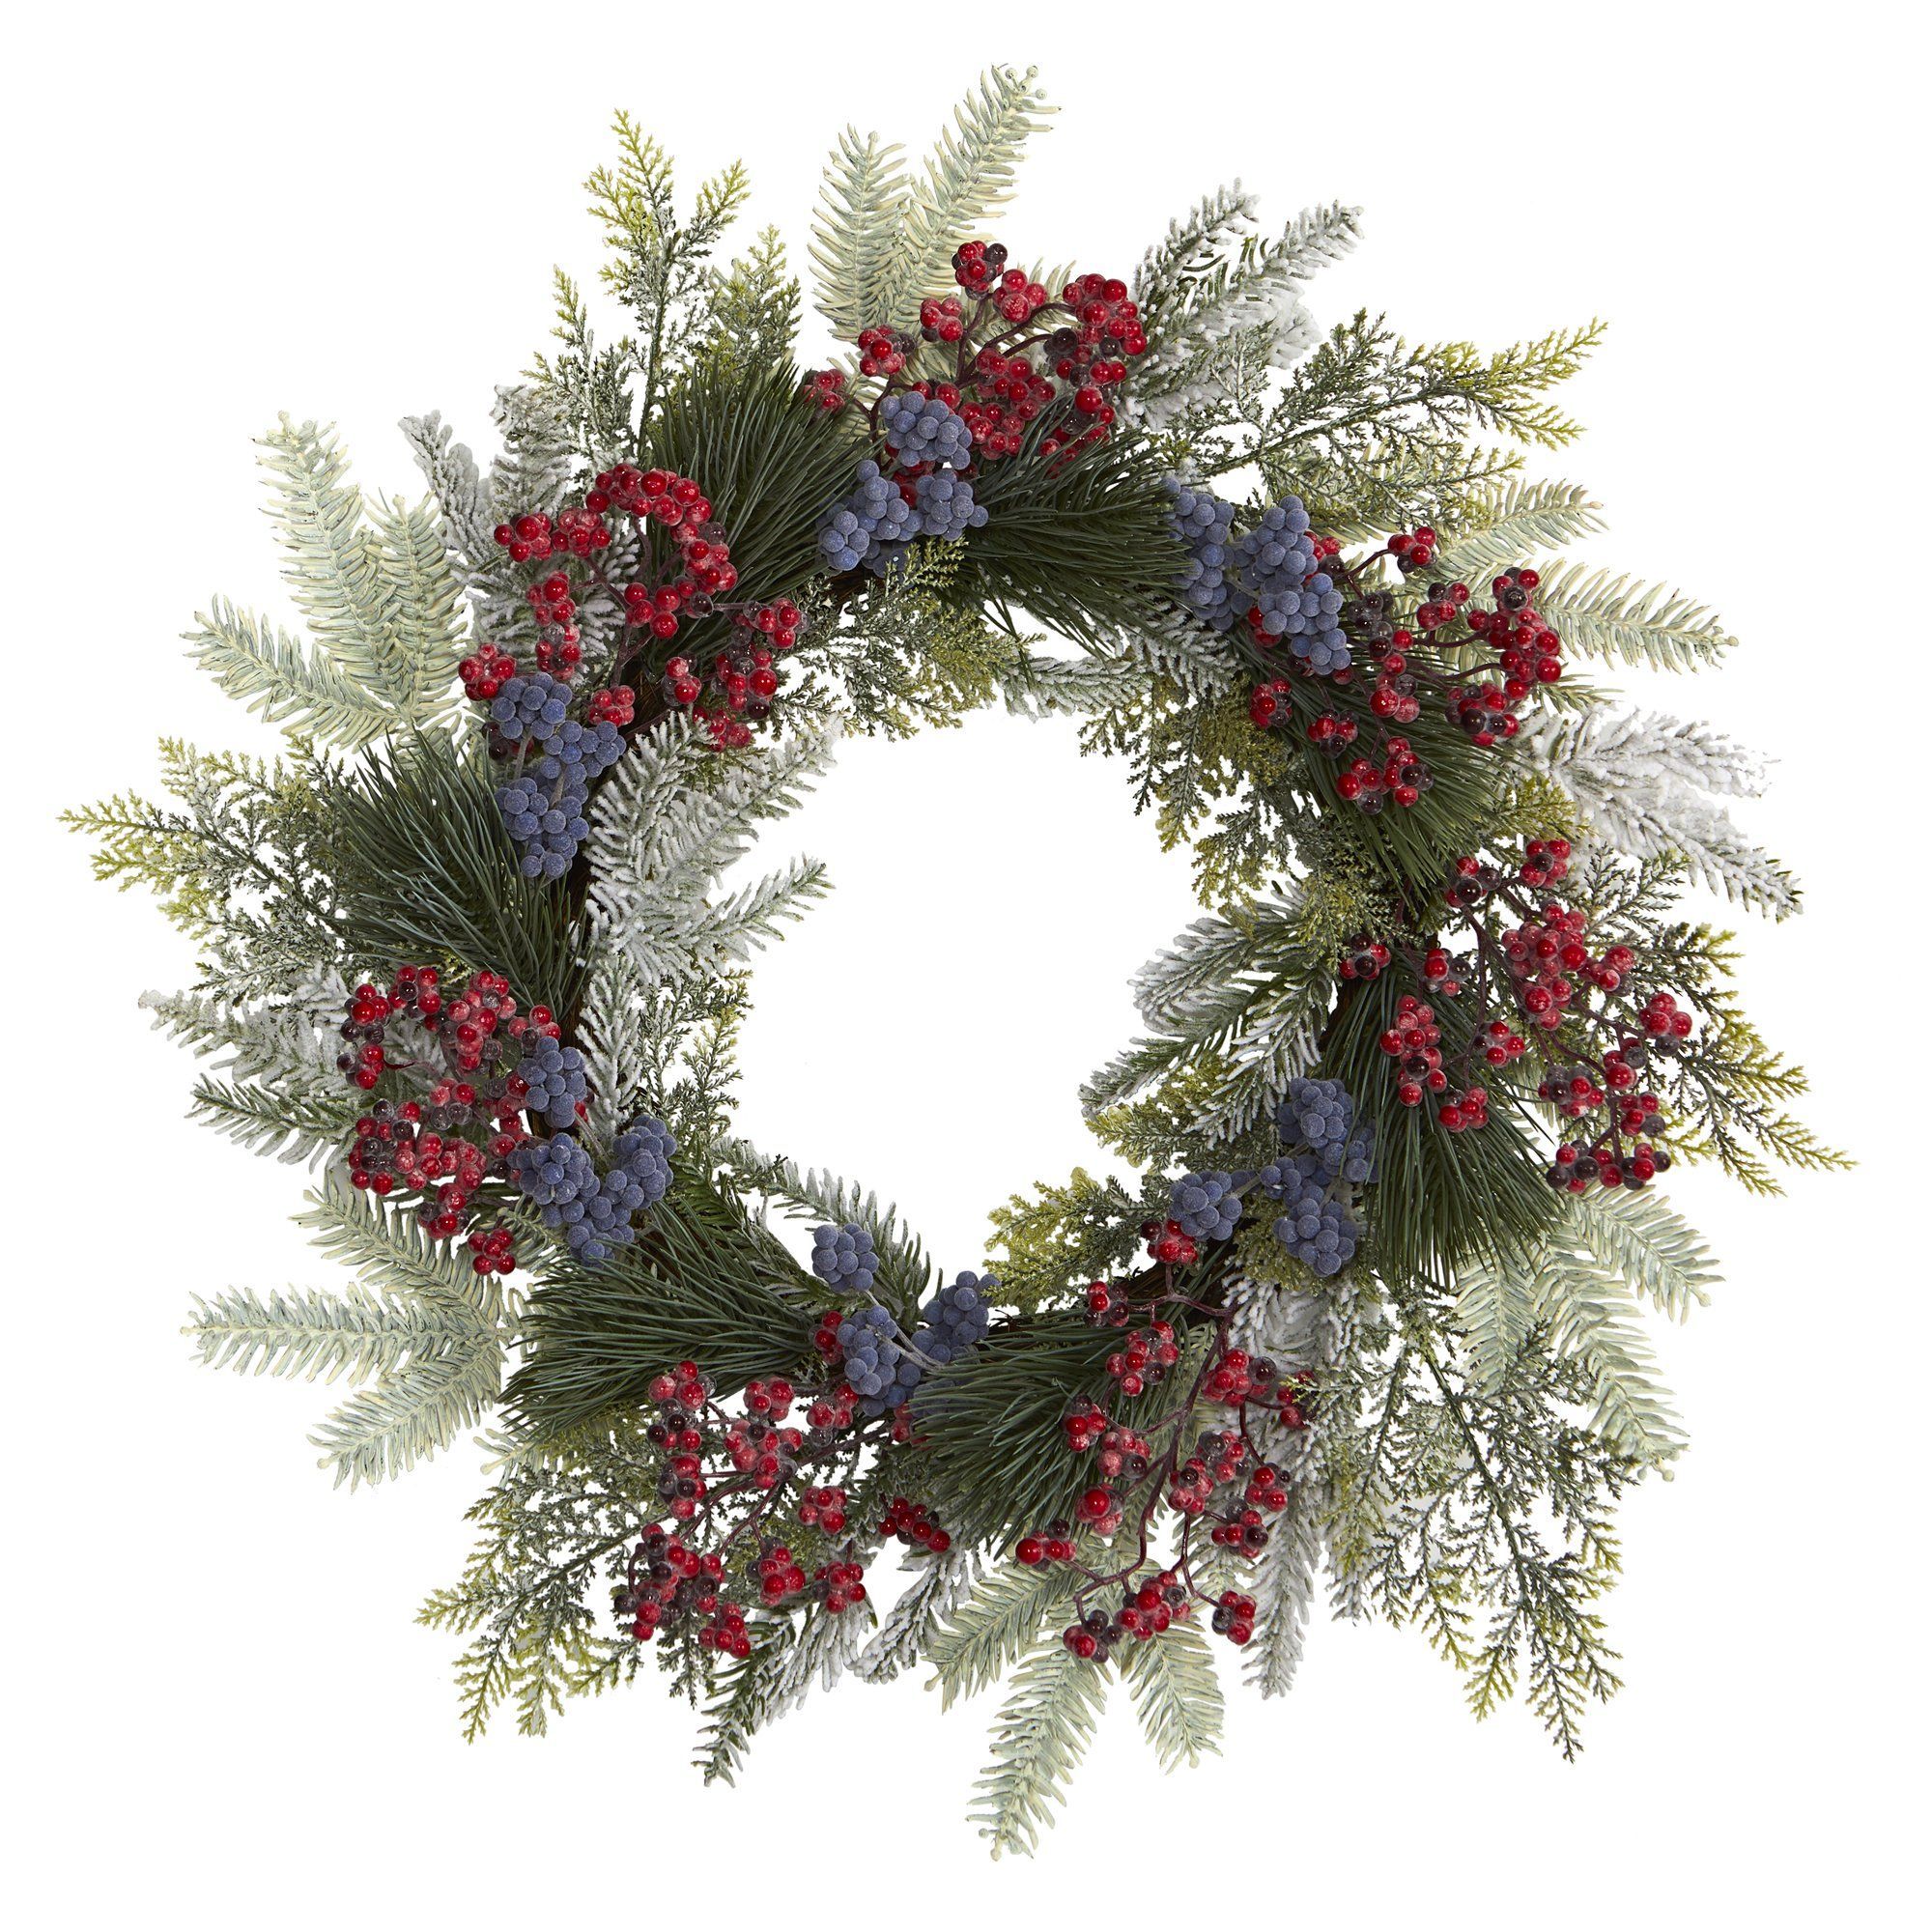 24” Pine and Cedar Artificial Wreath with Berries | Nearly Natural